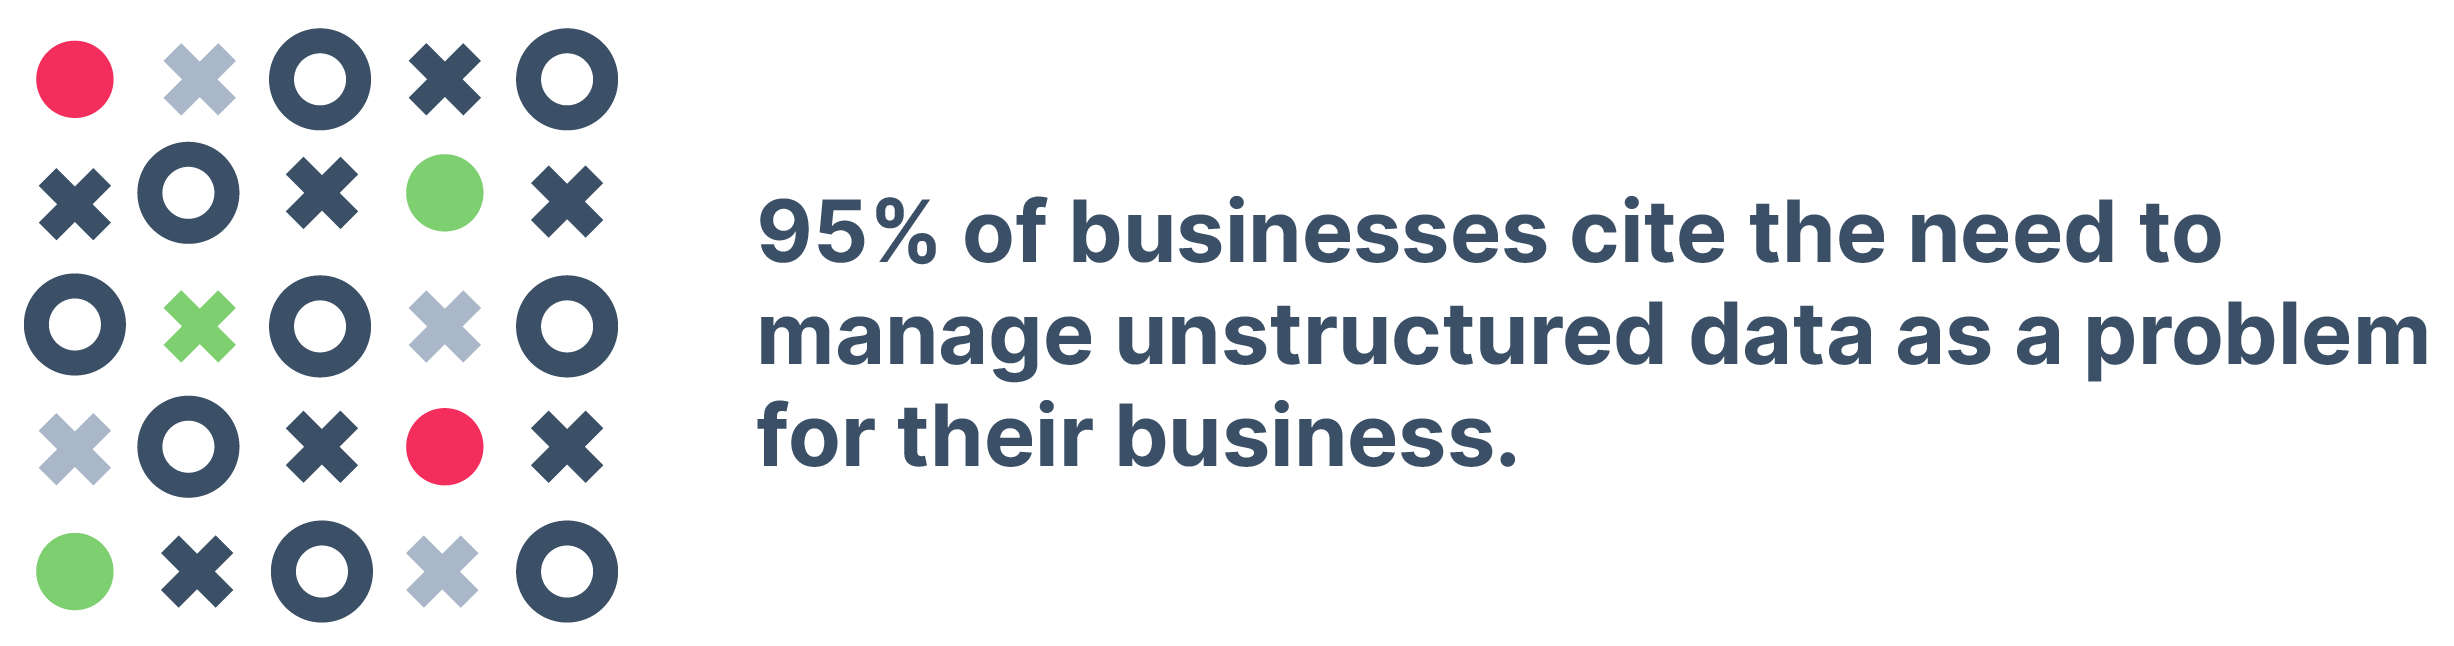 95% of business have issues with unstructured data